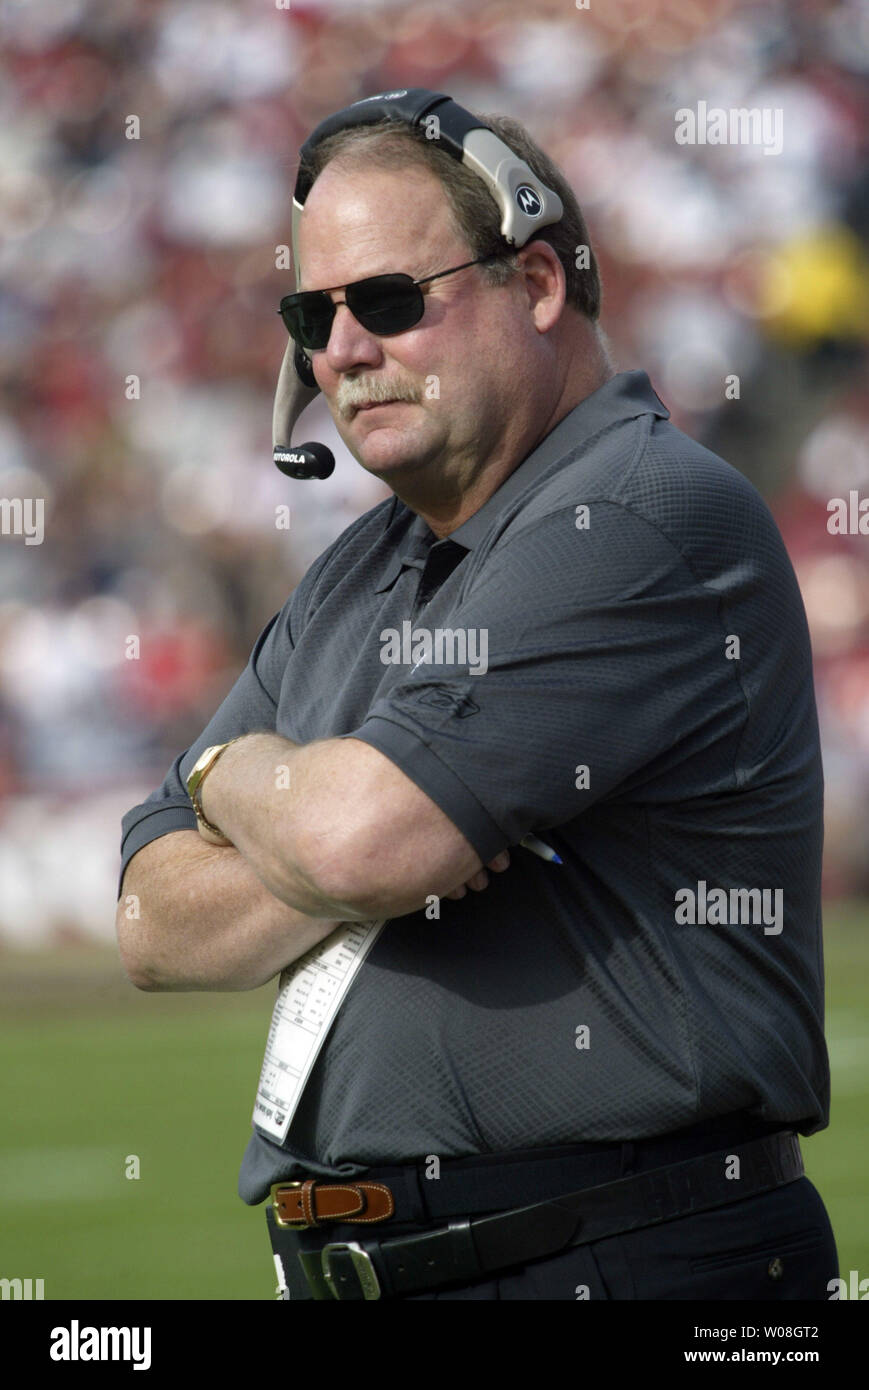 Seattle Seahawks head coach Mike Holmgren watches his team drop one to the San Francisco 49ers at Monster Park in San Francisco on November 19, 2006. The 49ers defeated the Seahawks 20-14.  (UPI Photo/Bruce Gordon) Stock Photo